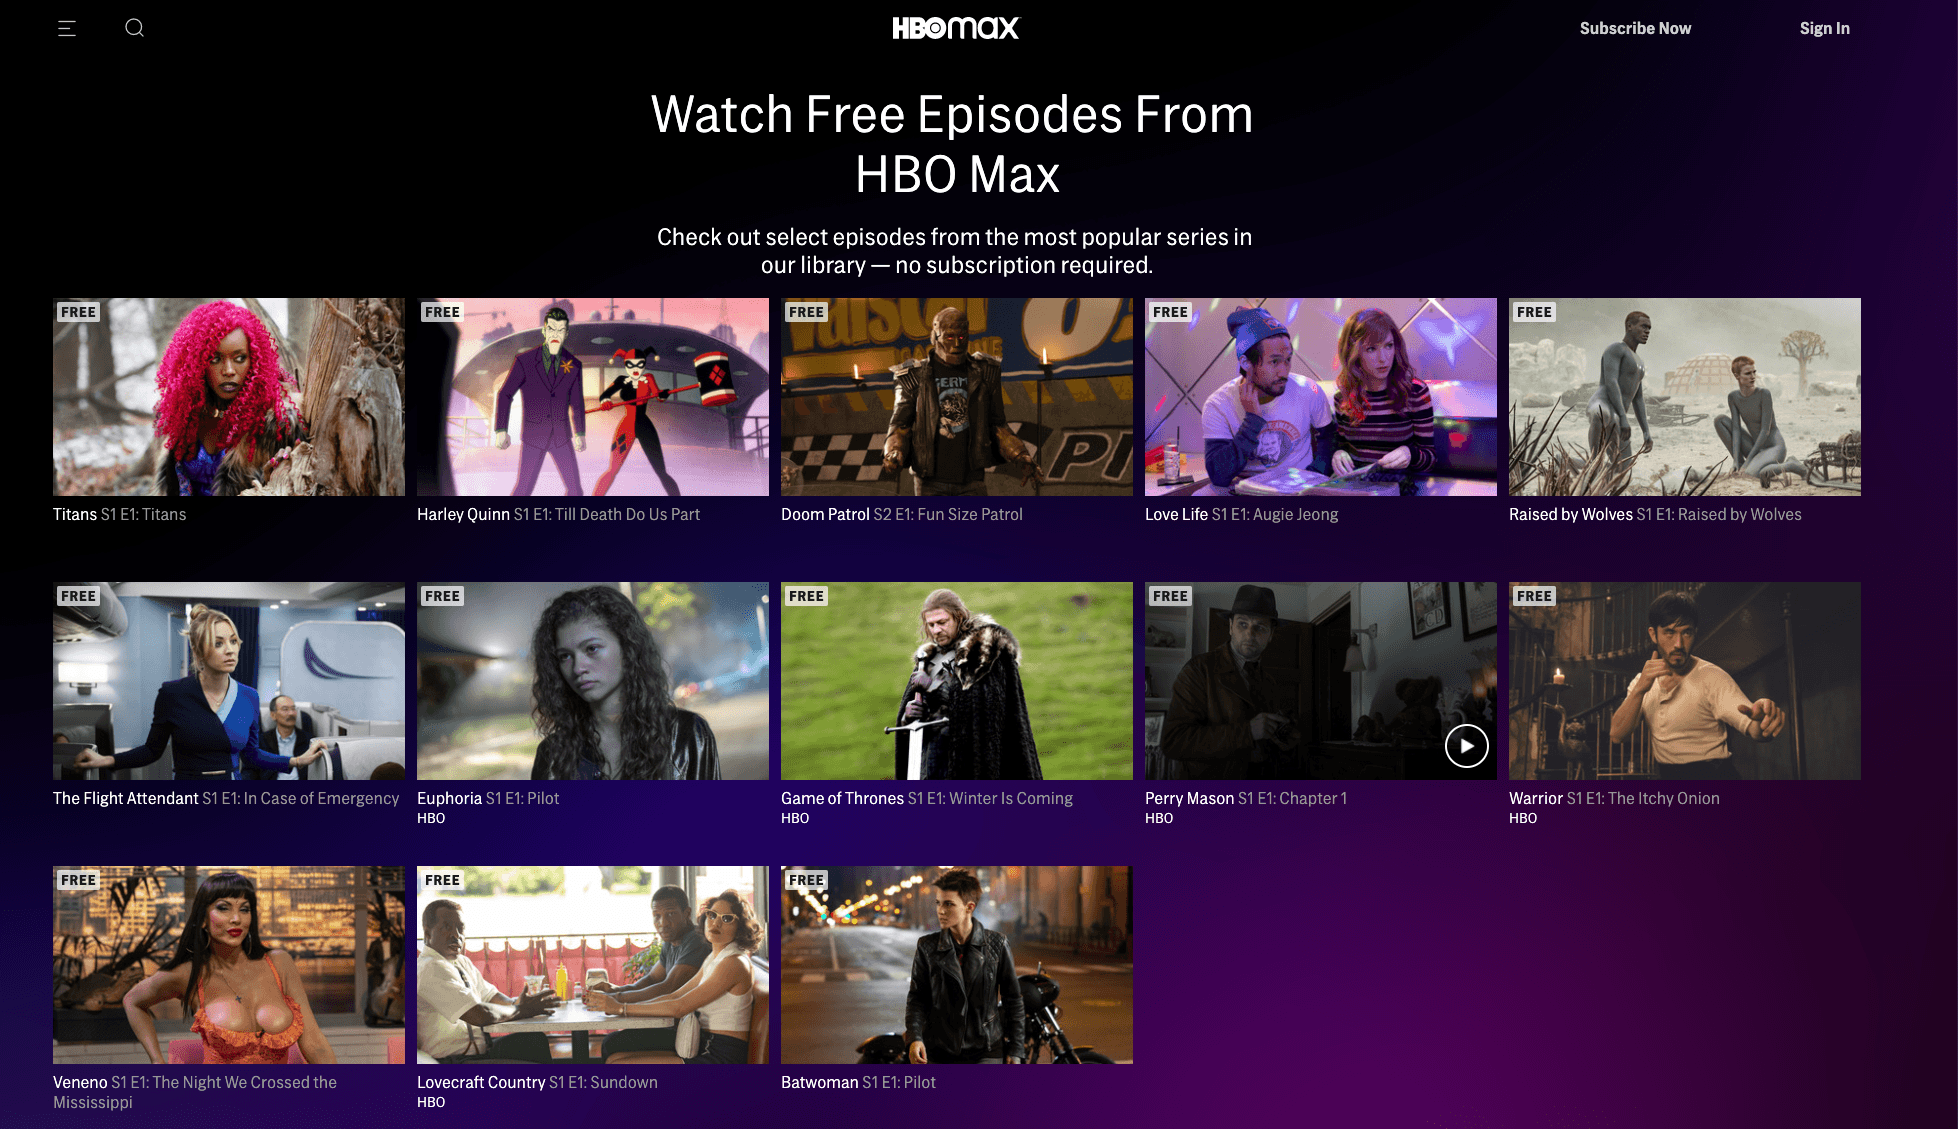 HBO Max is Offering Episodes of Popular Shows for Free In-App